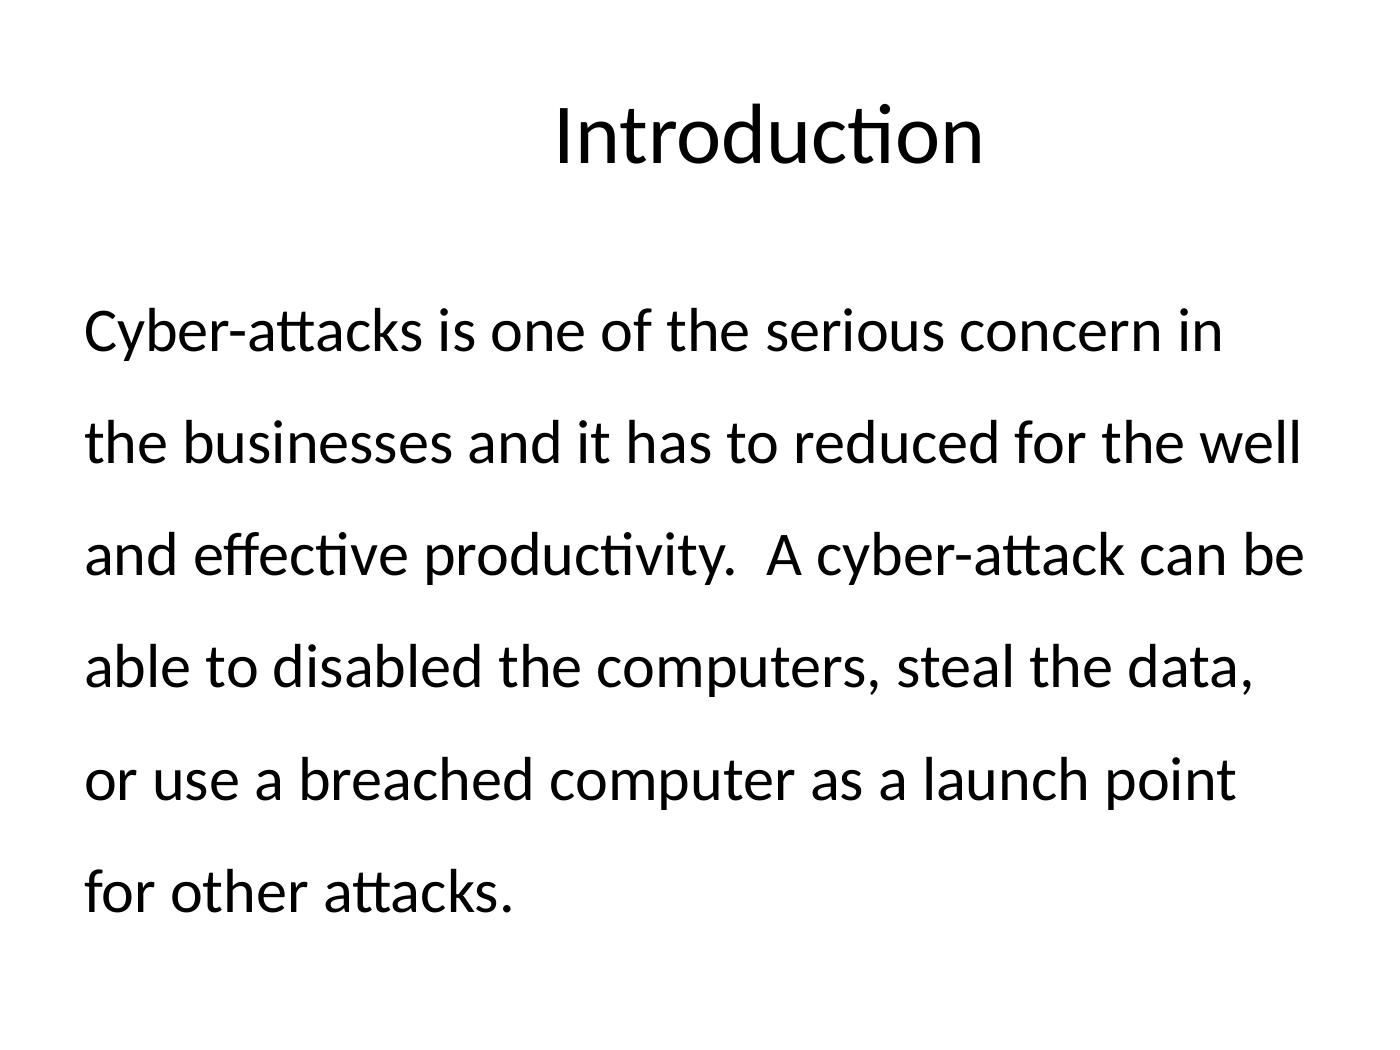 Cyber-attack on Microsoft company - Research Proposal_3